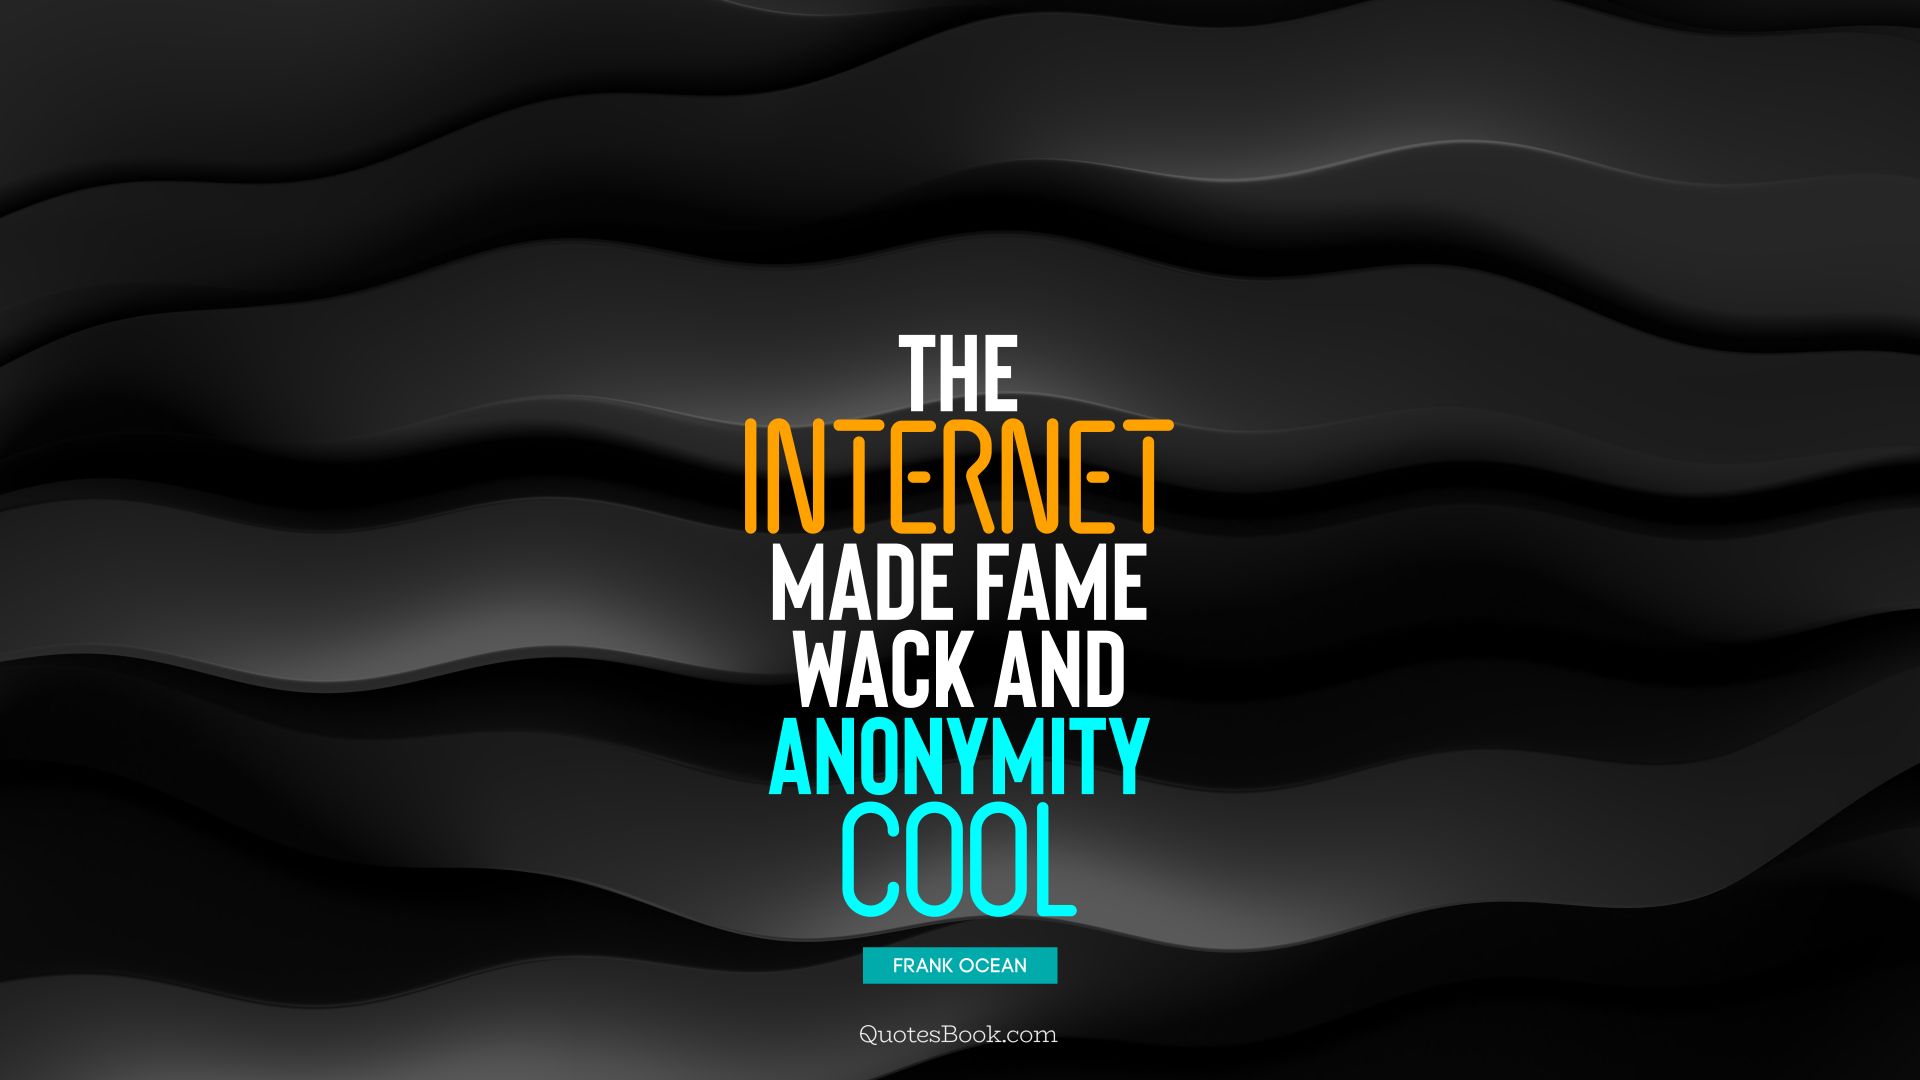 The Internet made fame wack and anonymity cool. - Quote by Frank Ocean